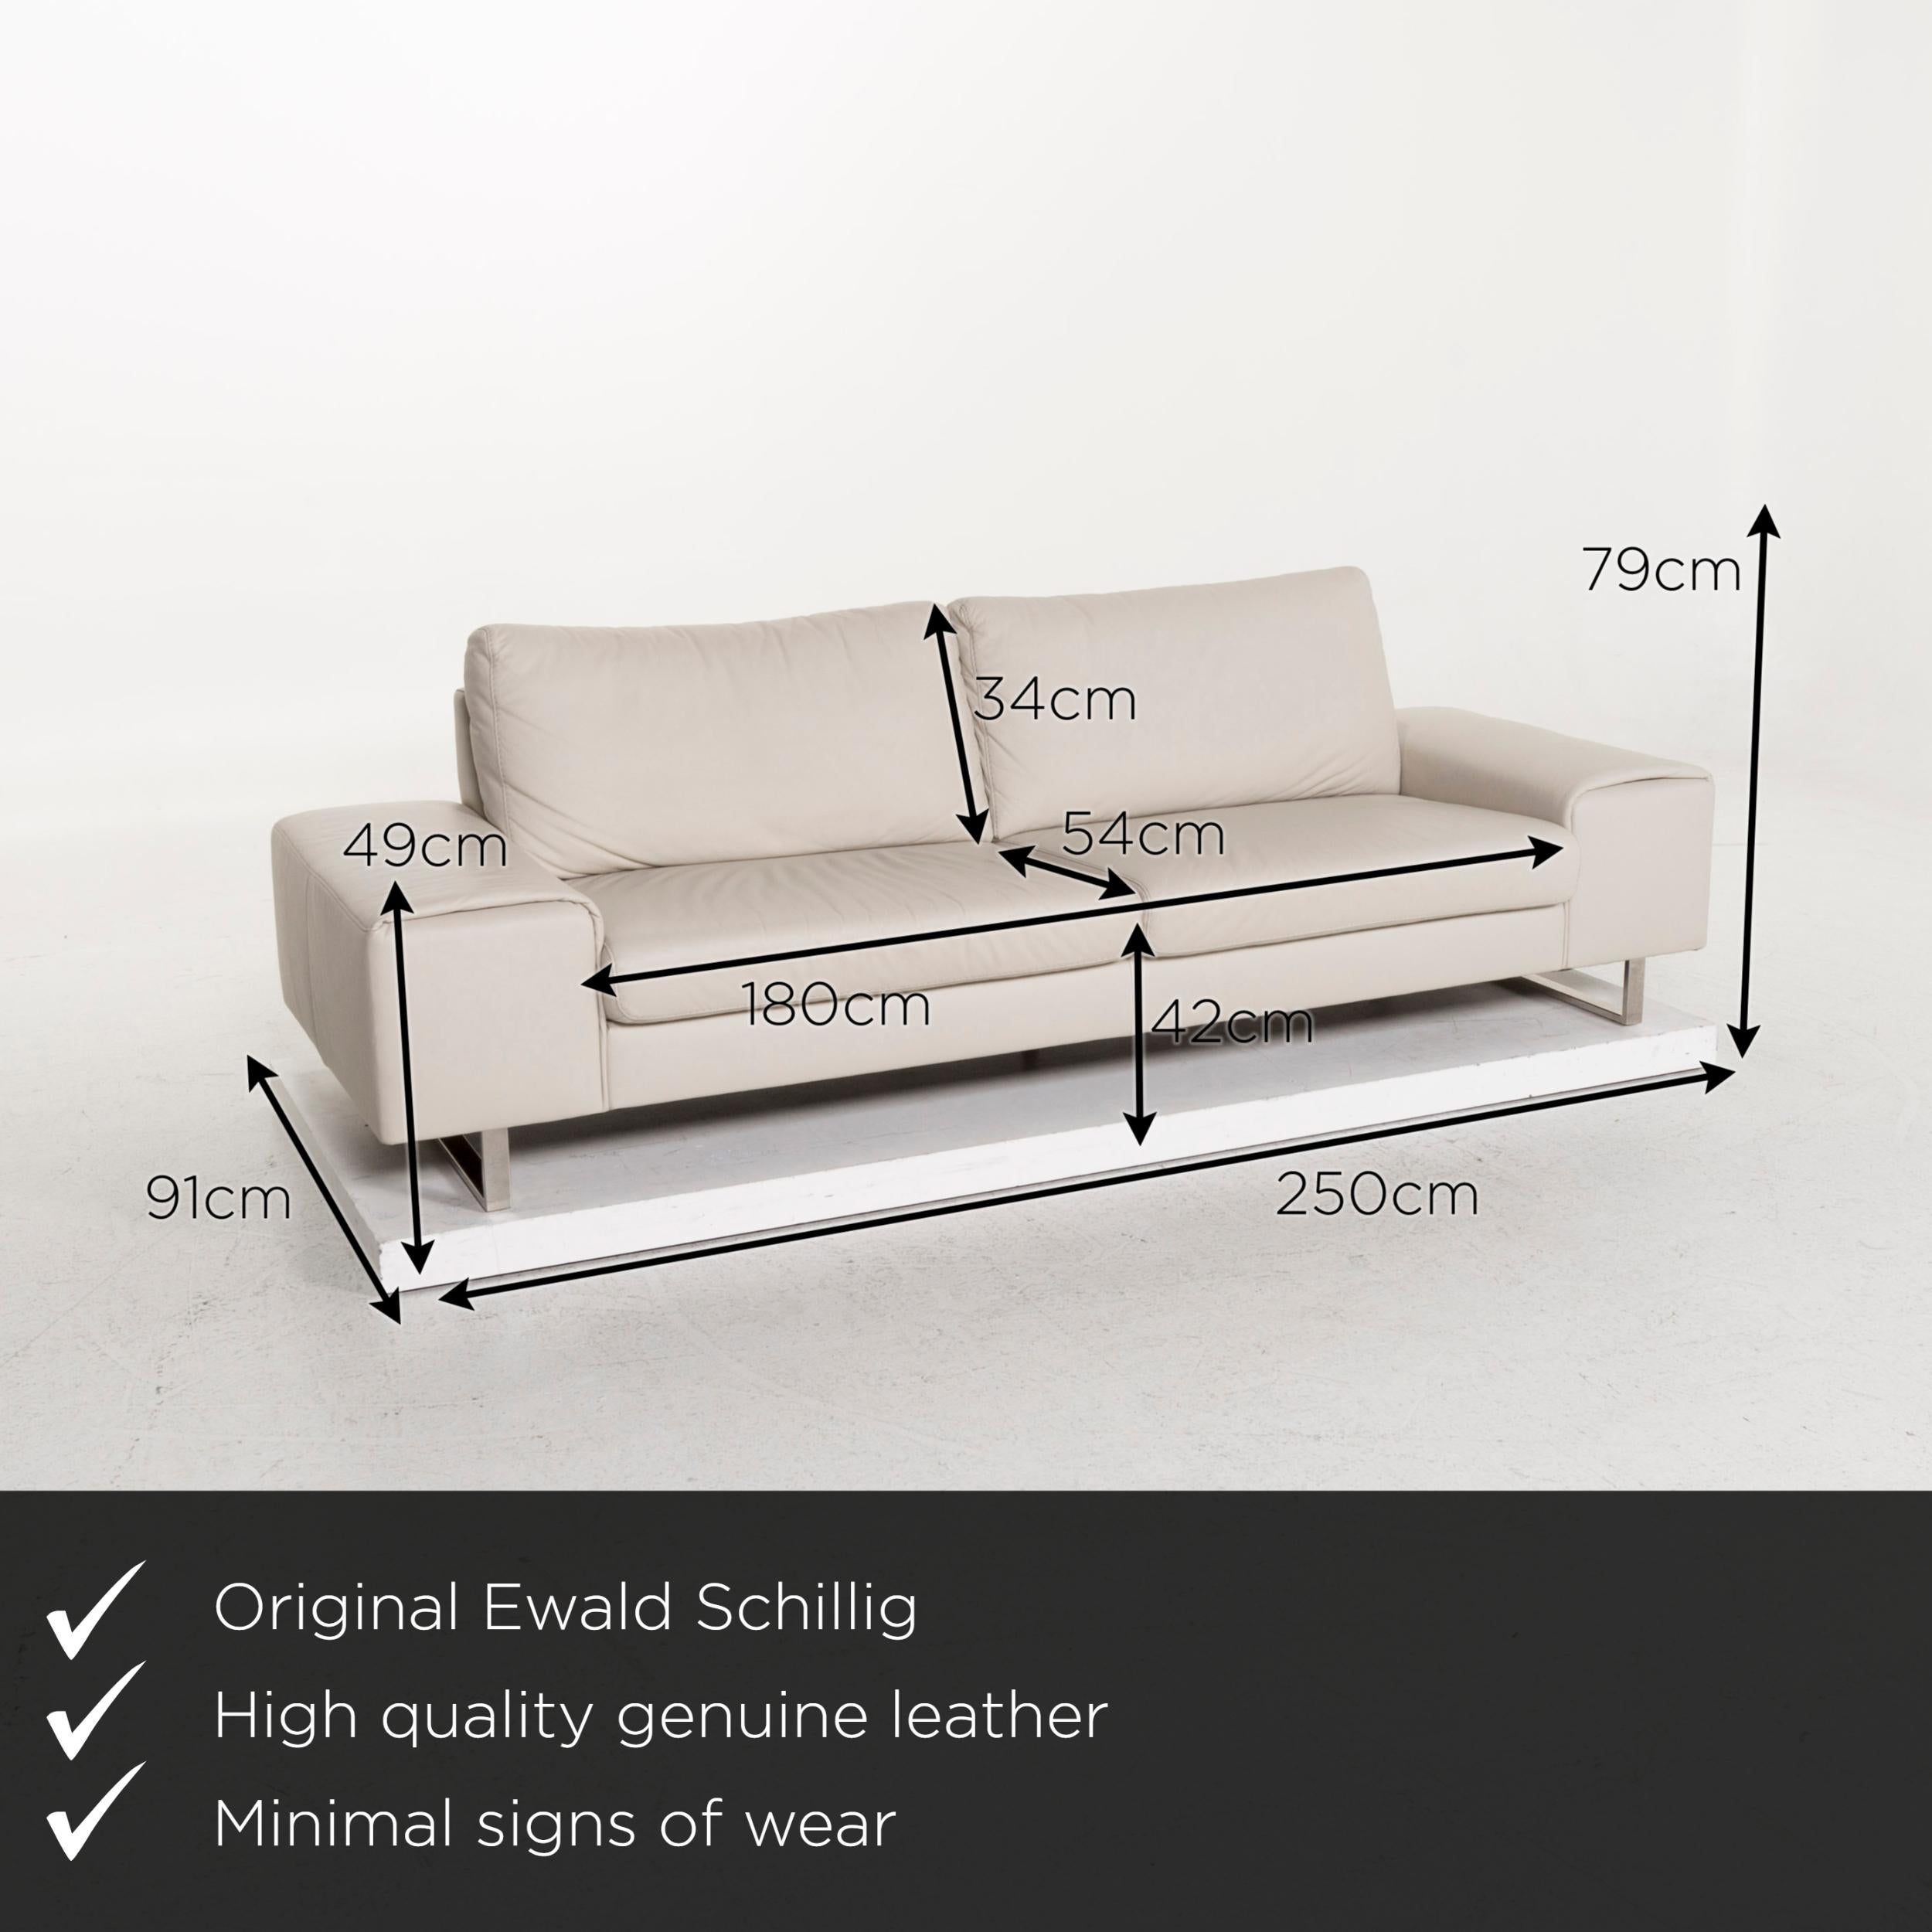 We present to you an Ewald Schillig leather sofa gray three-seat.
 

 Product measurements in centimeters:
 

Depth 91
Width 250
Height 79
Seat height 42
Rest height 49
Seat depth 54
Seat width 180
Back height 34.
 